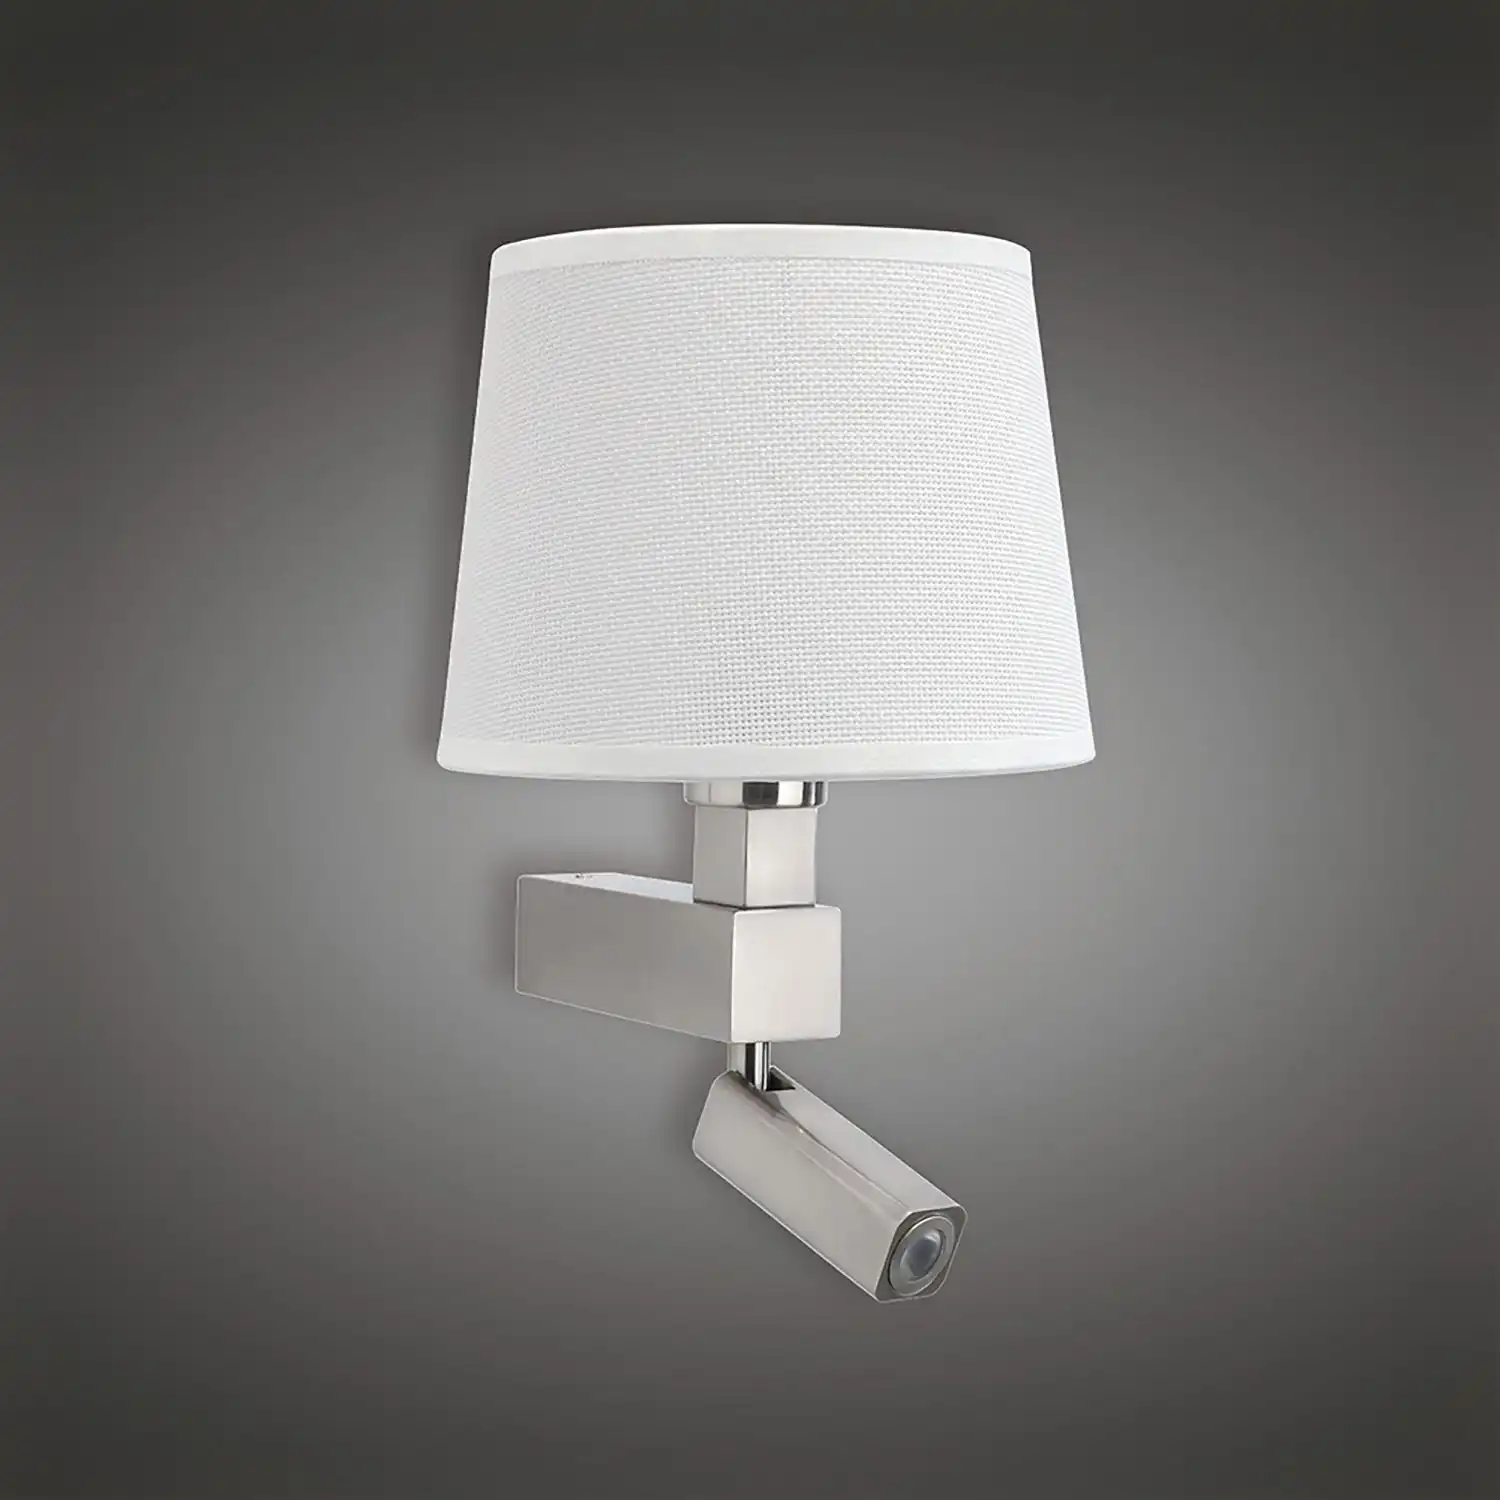 Bahia Wall Lamp 1 Light Without Shade E27 Plus Reading Light 3W LED Satin Nickel 4000K, 200lm, 3yrs Warranty